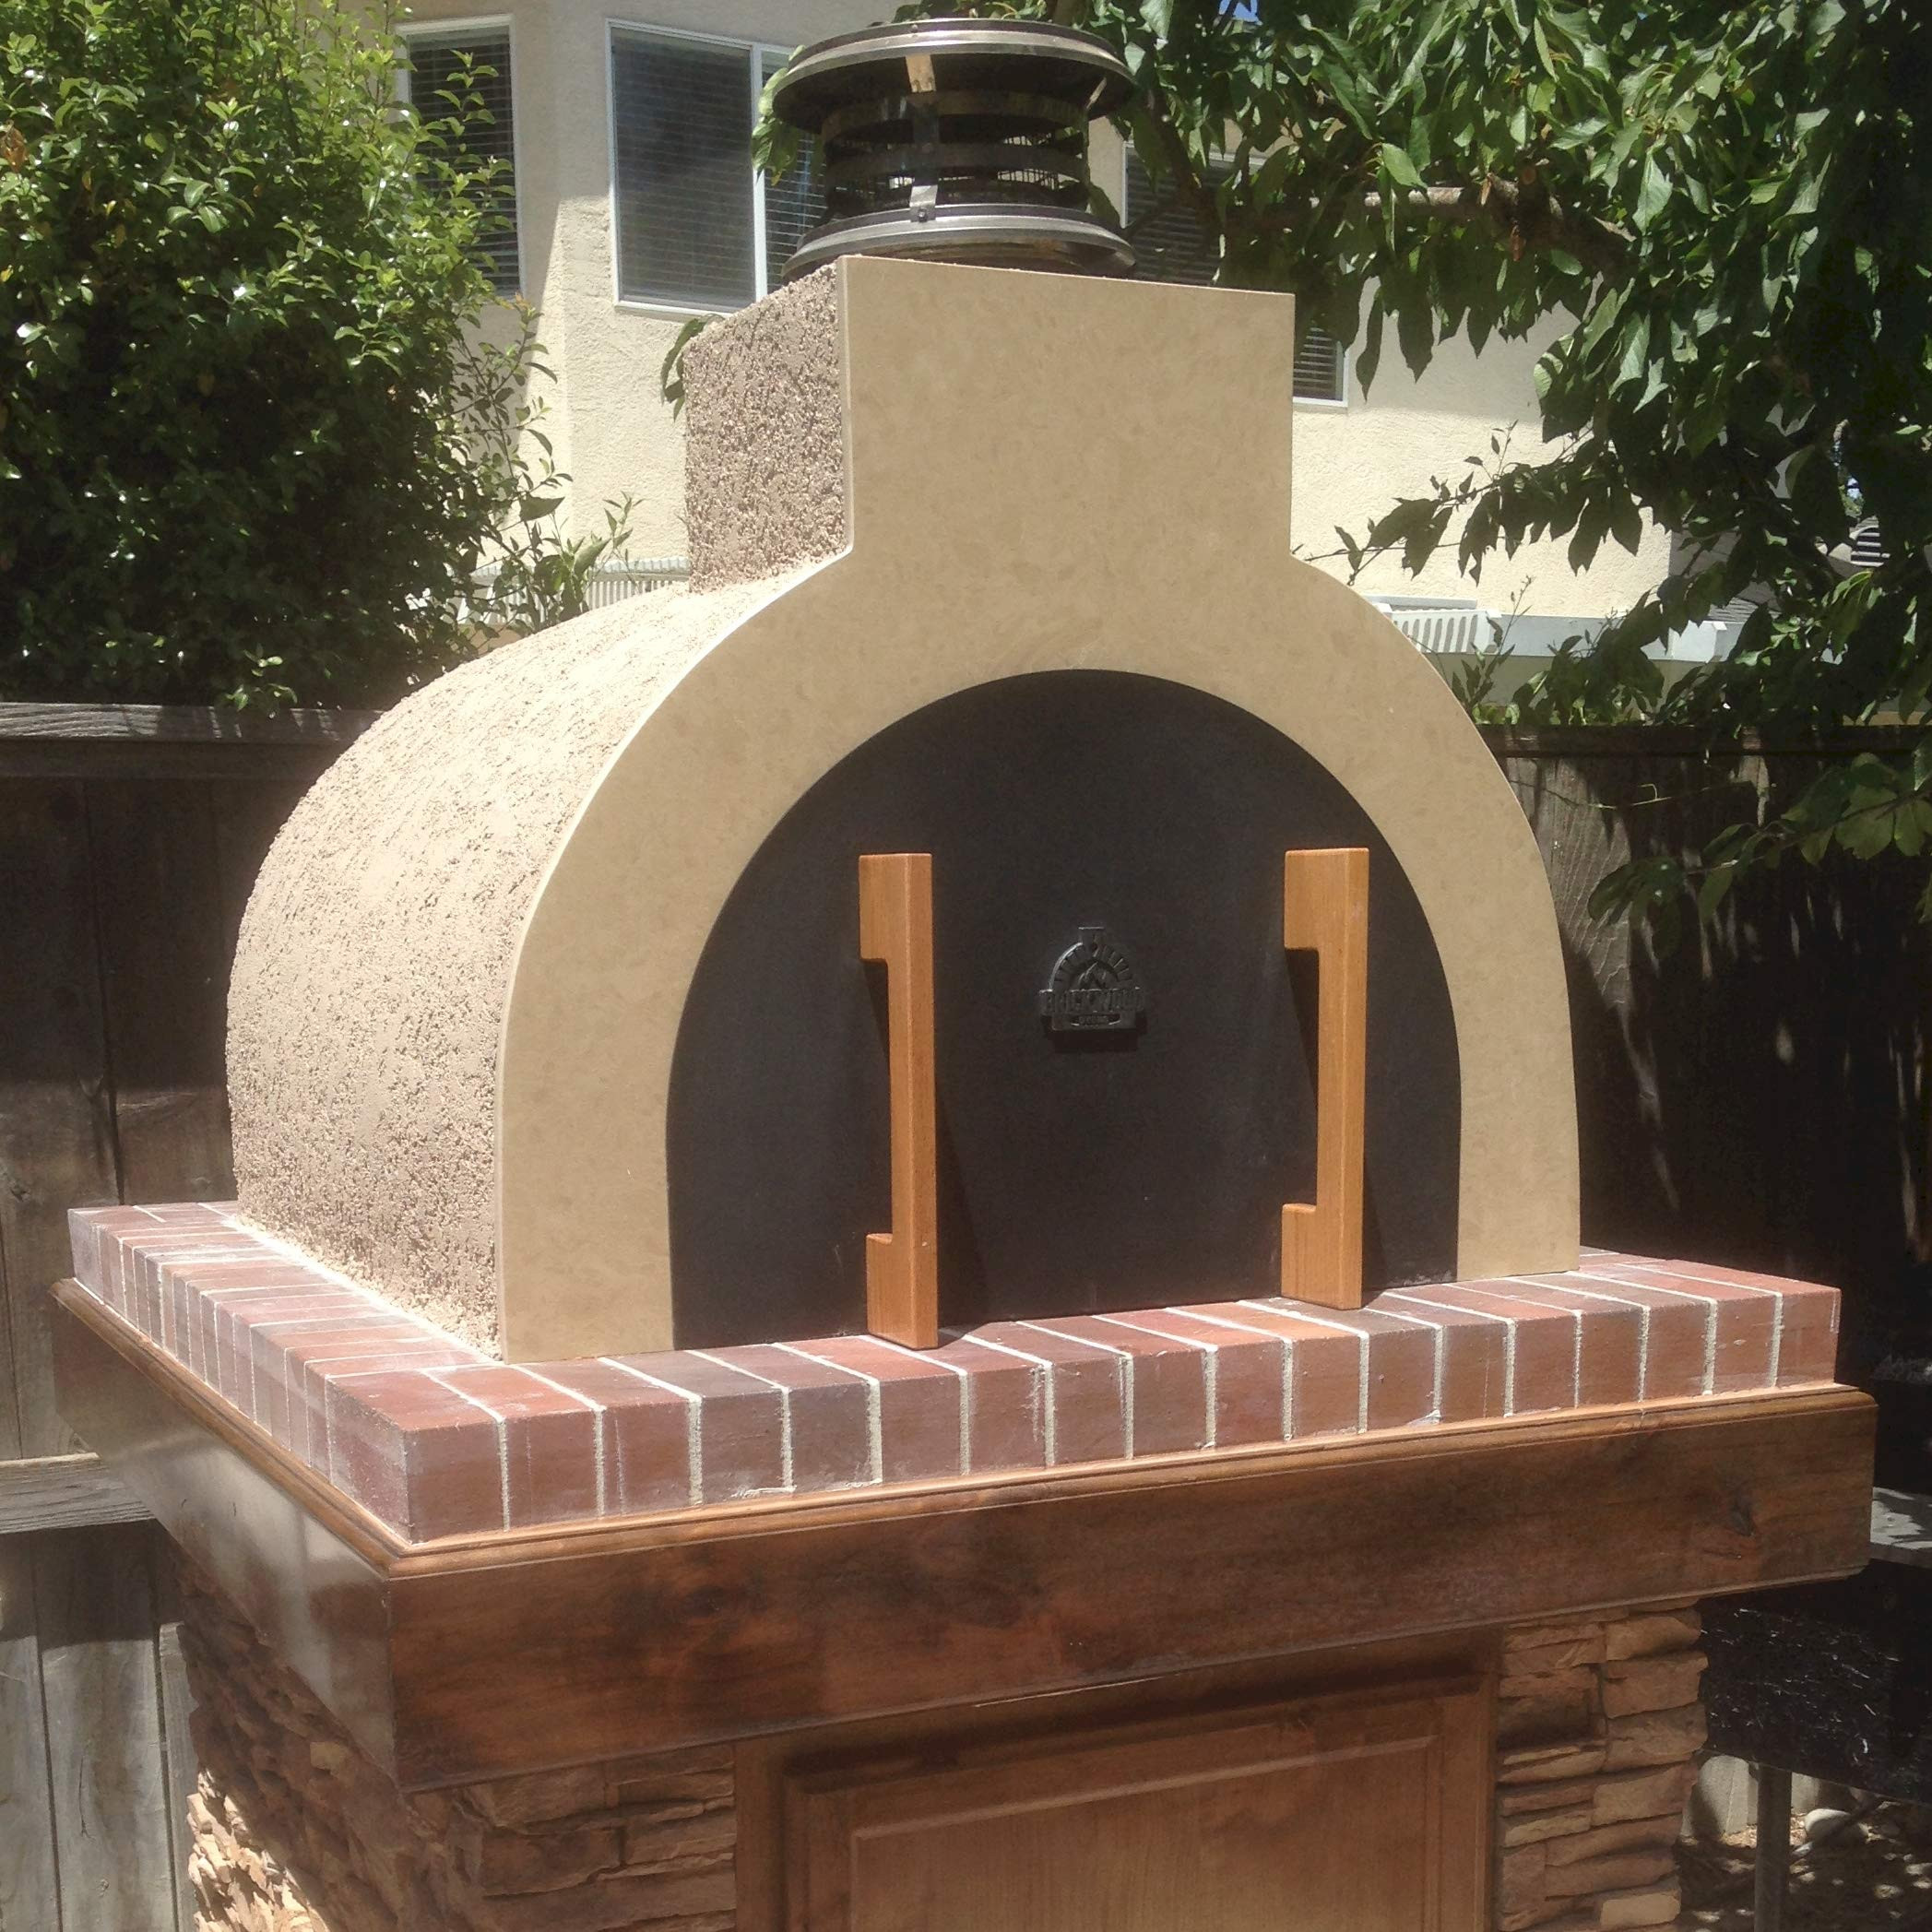 Pizza Oven Kit DIY
 Outdoor Pizza Oven Kit • DIY Pizza Oven – The Mattone